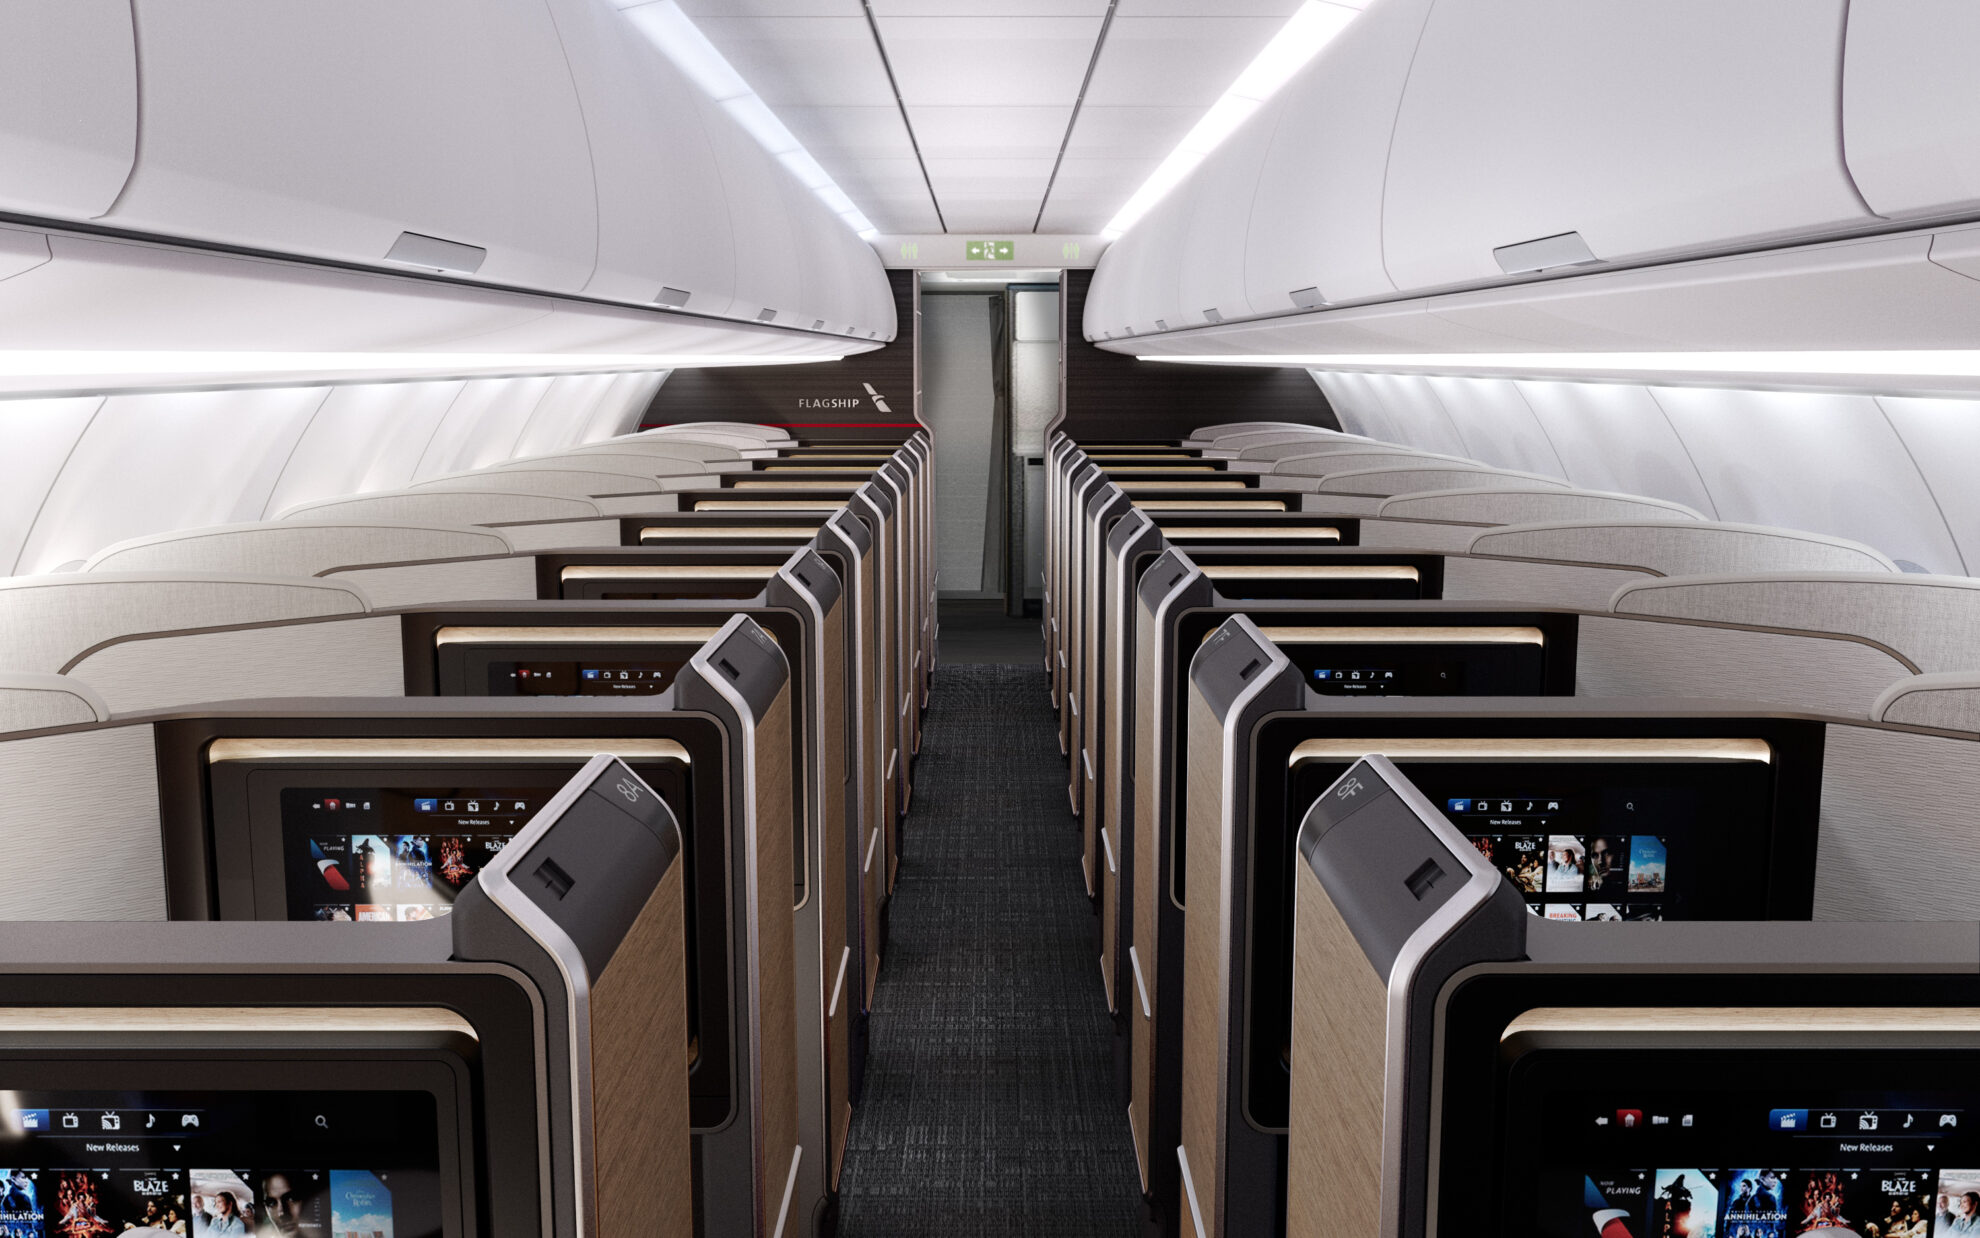 American Airlines Flagship Suite A321